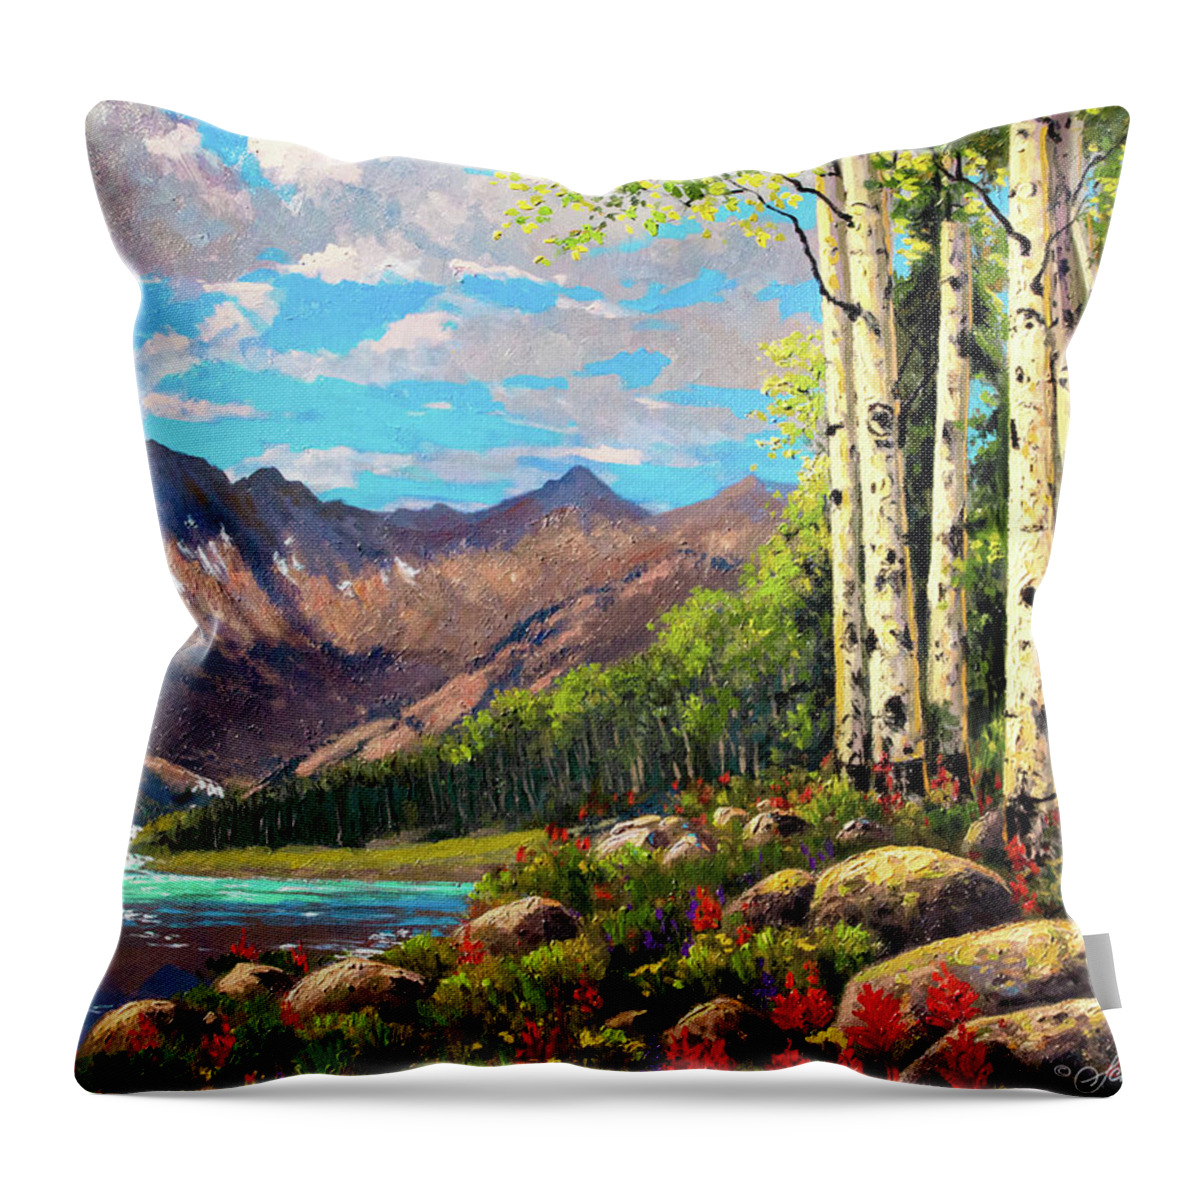 Schaefer Miles Throw Pillow featuring the painting Piney Ranch Summer Rocky Mountains by Kevin Wendy Schaefer Miles